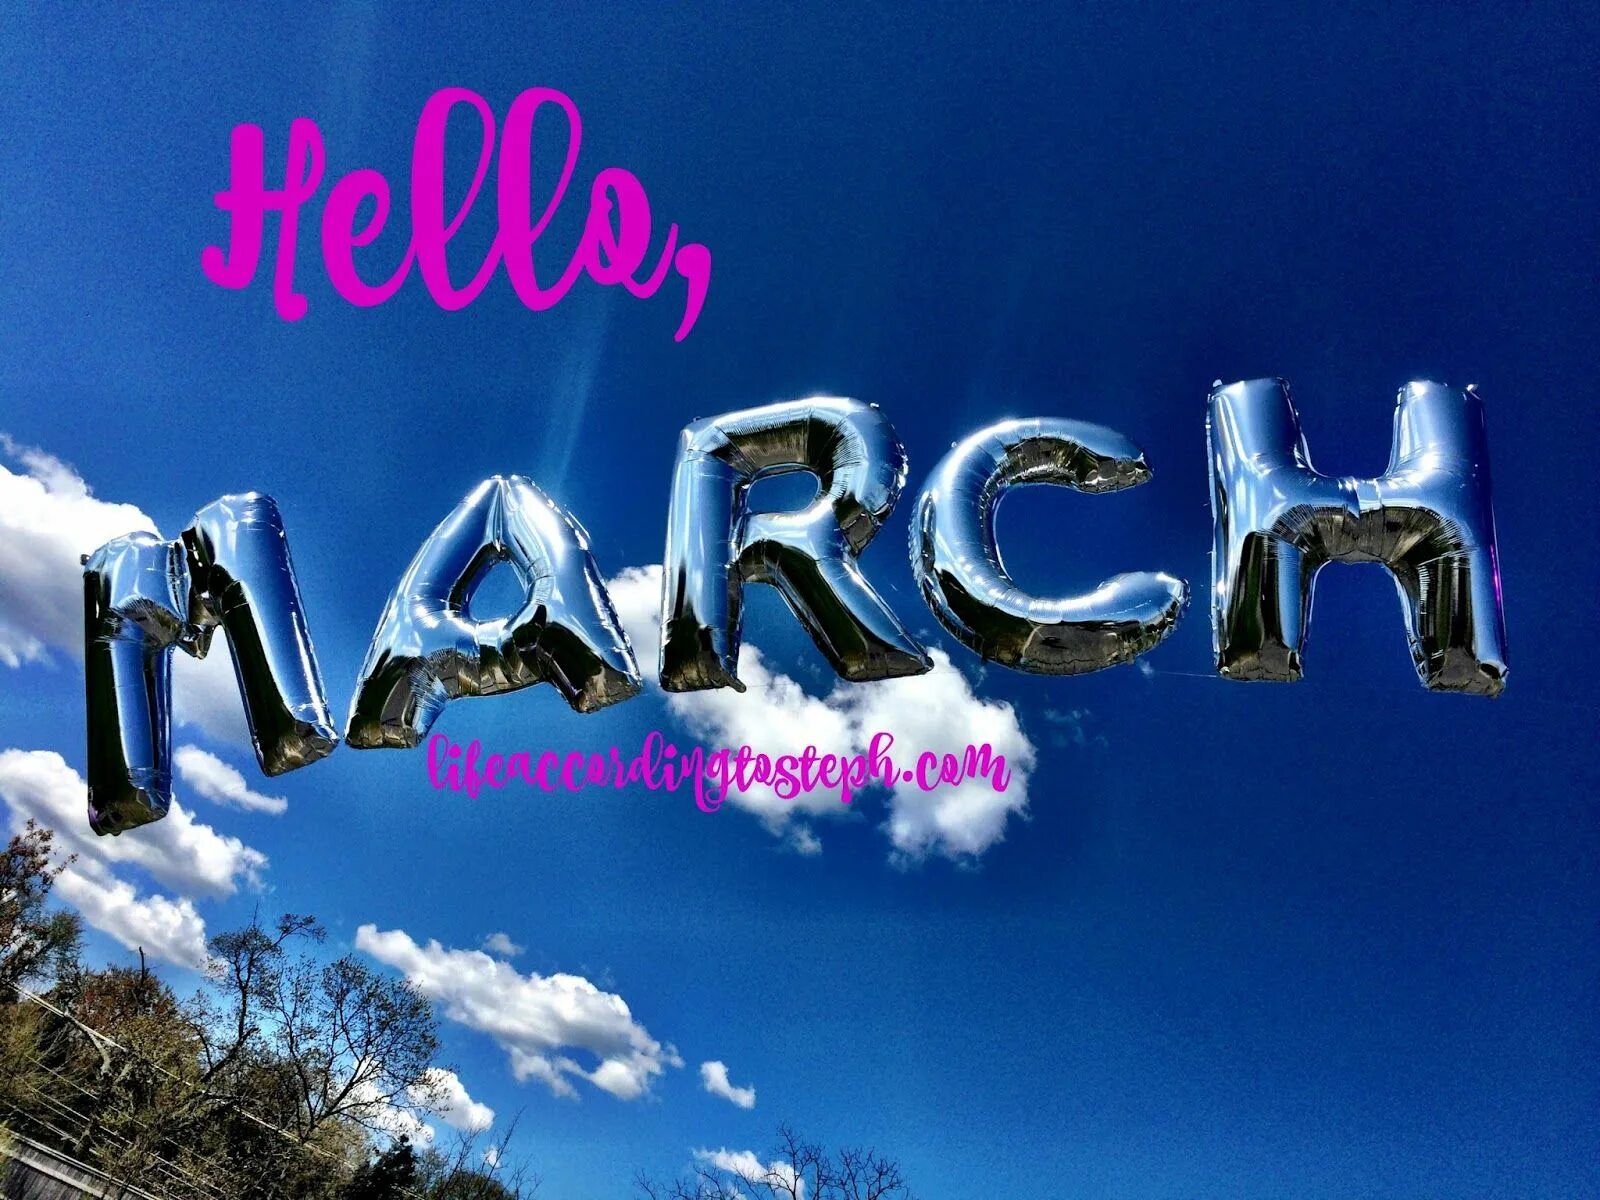 Pictures march. Хеллоу март. Привет март. Hello March картинки. Март надпись.